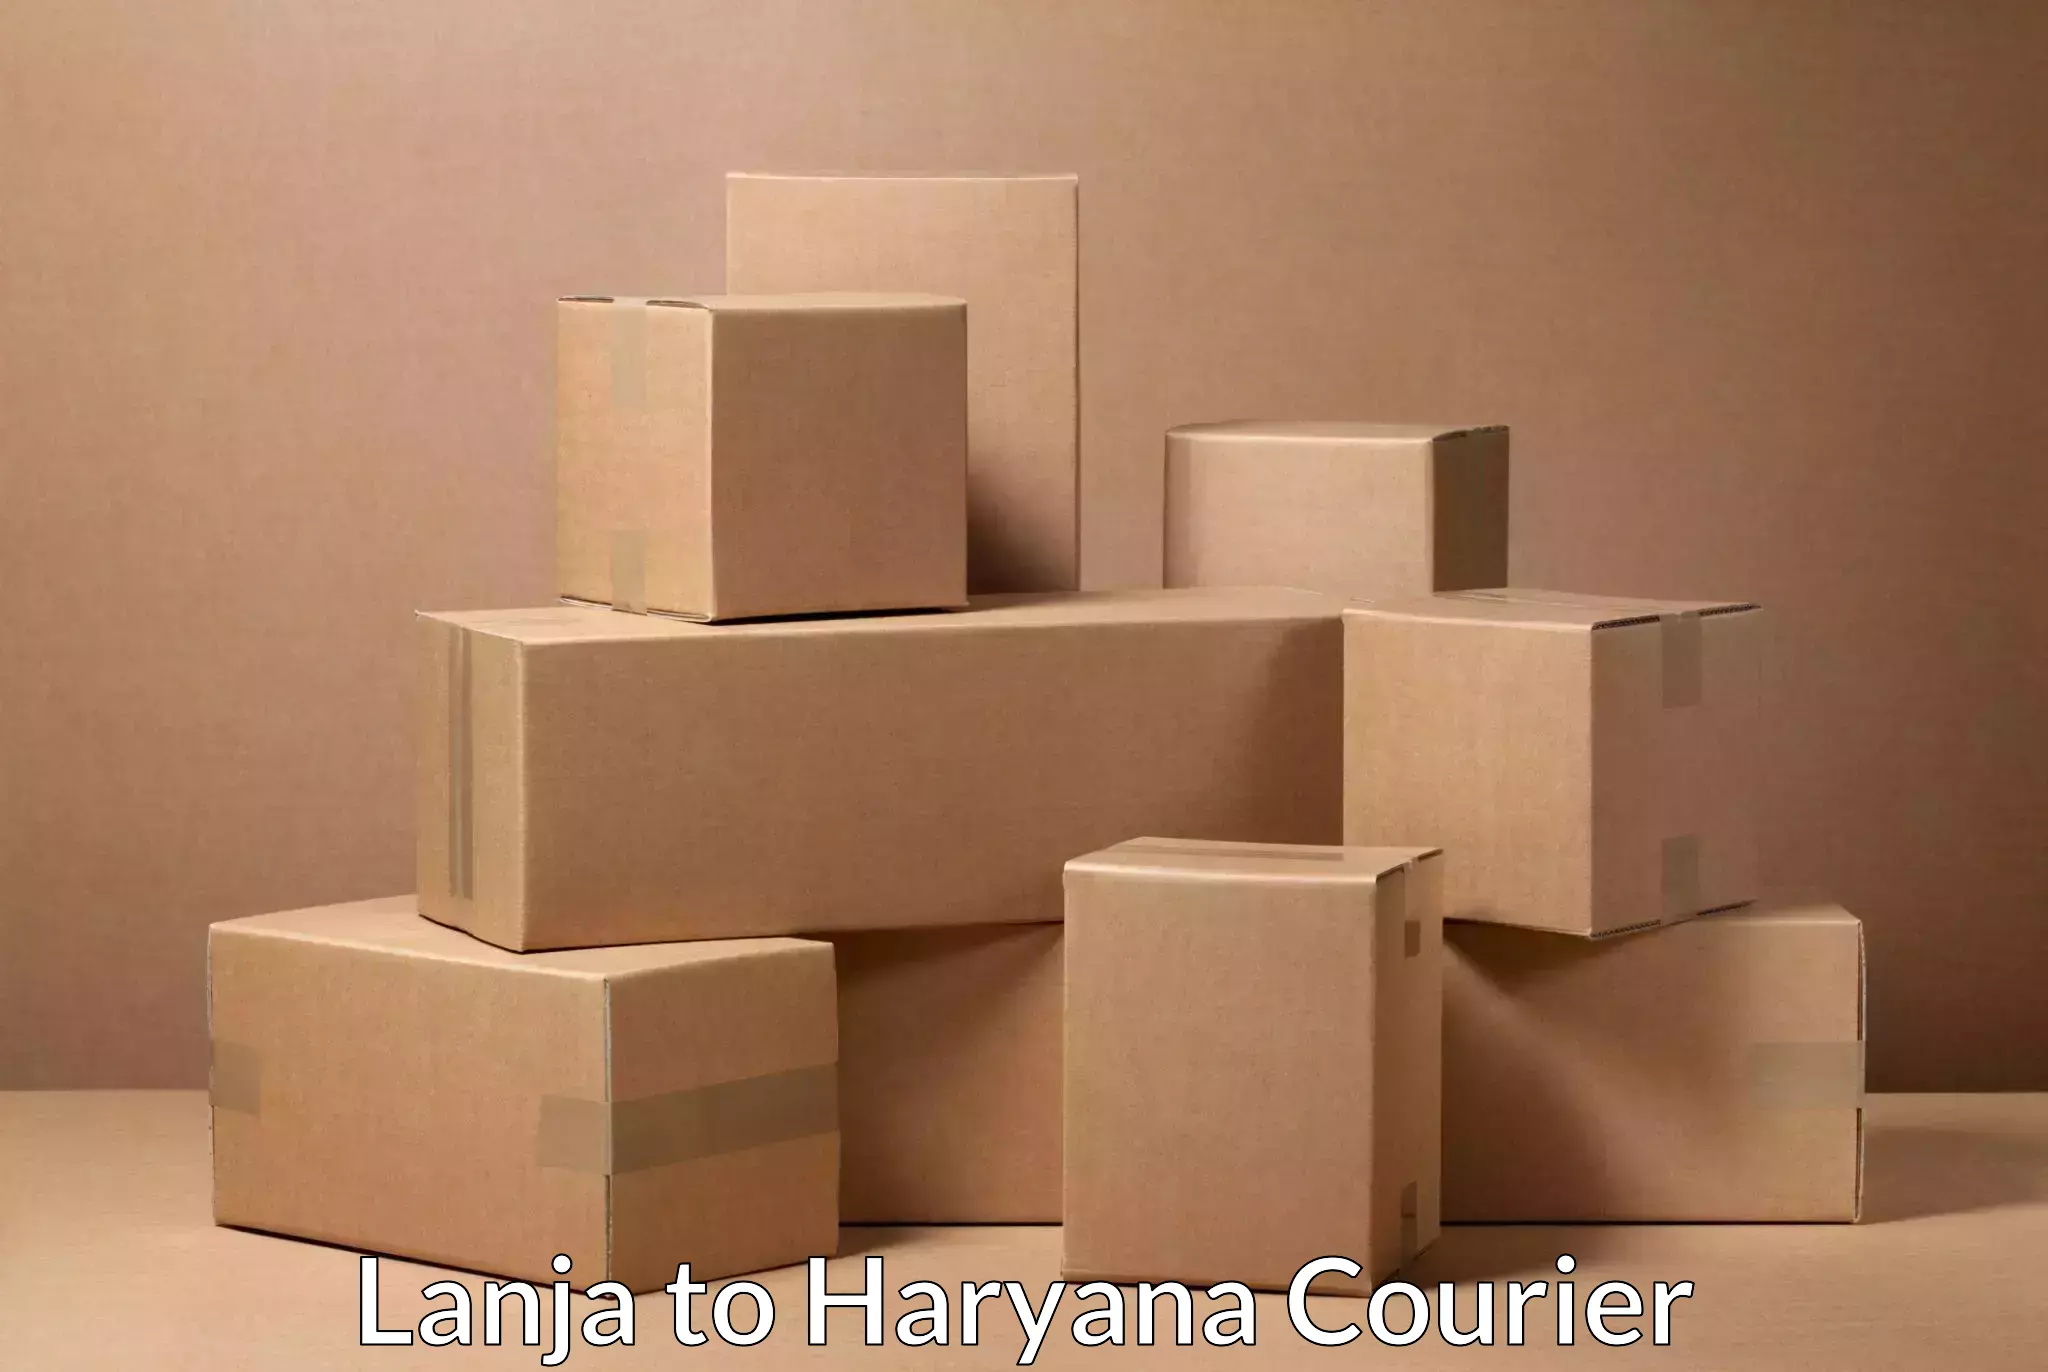 24-hour courier service in Lanja to Chaudhary Charan Singh Haryana Agricultural University Hisar